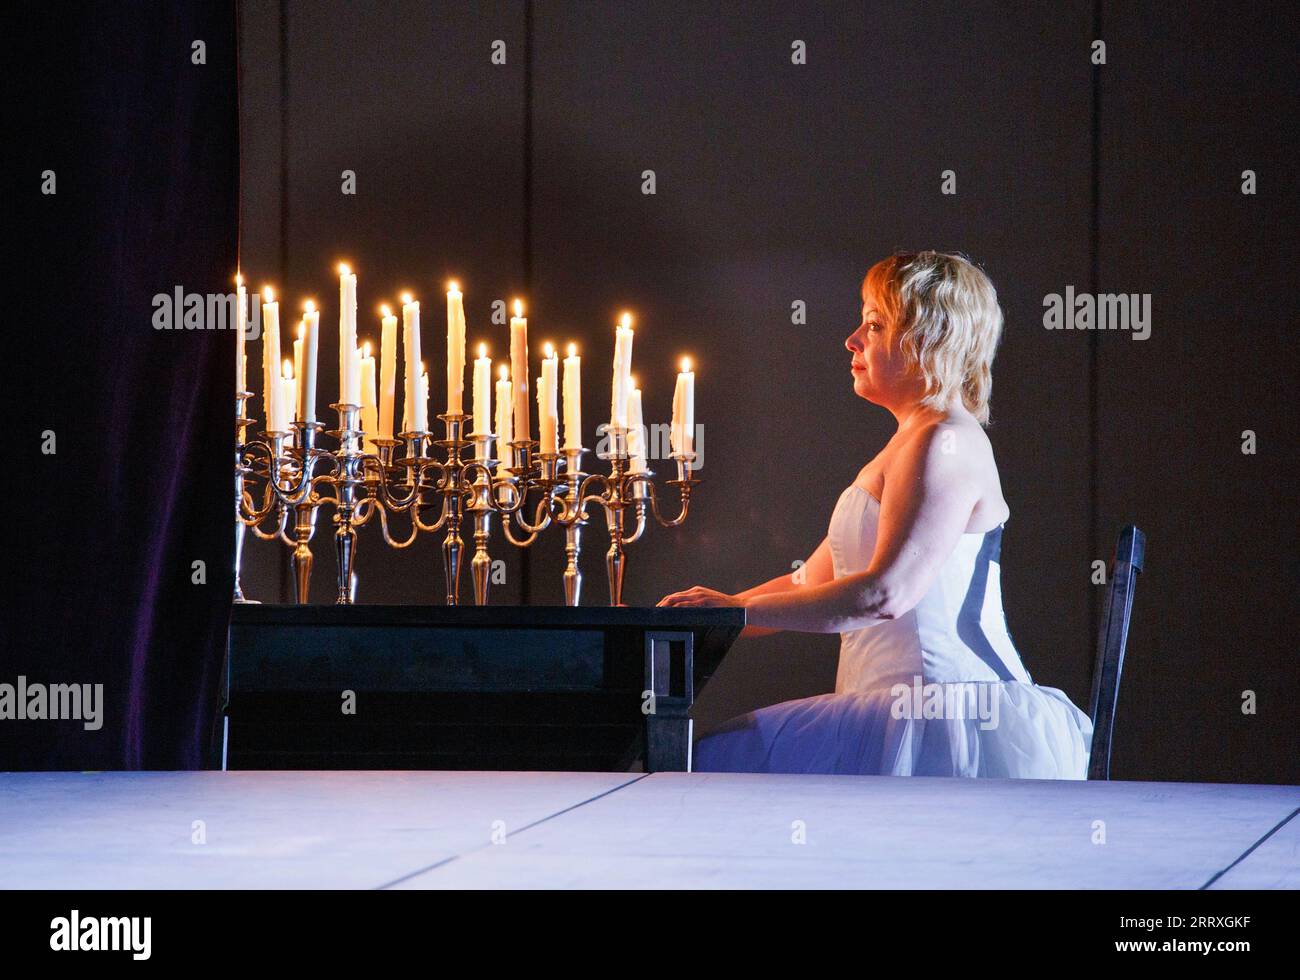 Nina Stemme (Isolde) in TRISTAN UND ISOLDE by Wagner at The Royal Opera, Covent Garden, London WC2  05/12/2014     conductor: Antonio Pappano  design: Johannes Leiacker  lighting: Olaf Winter  director: Christof Loy Stock Photo